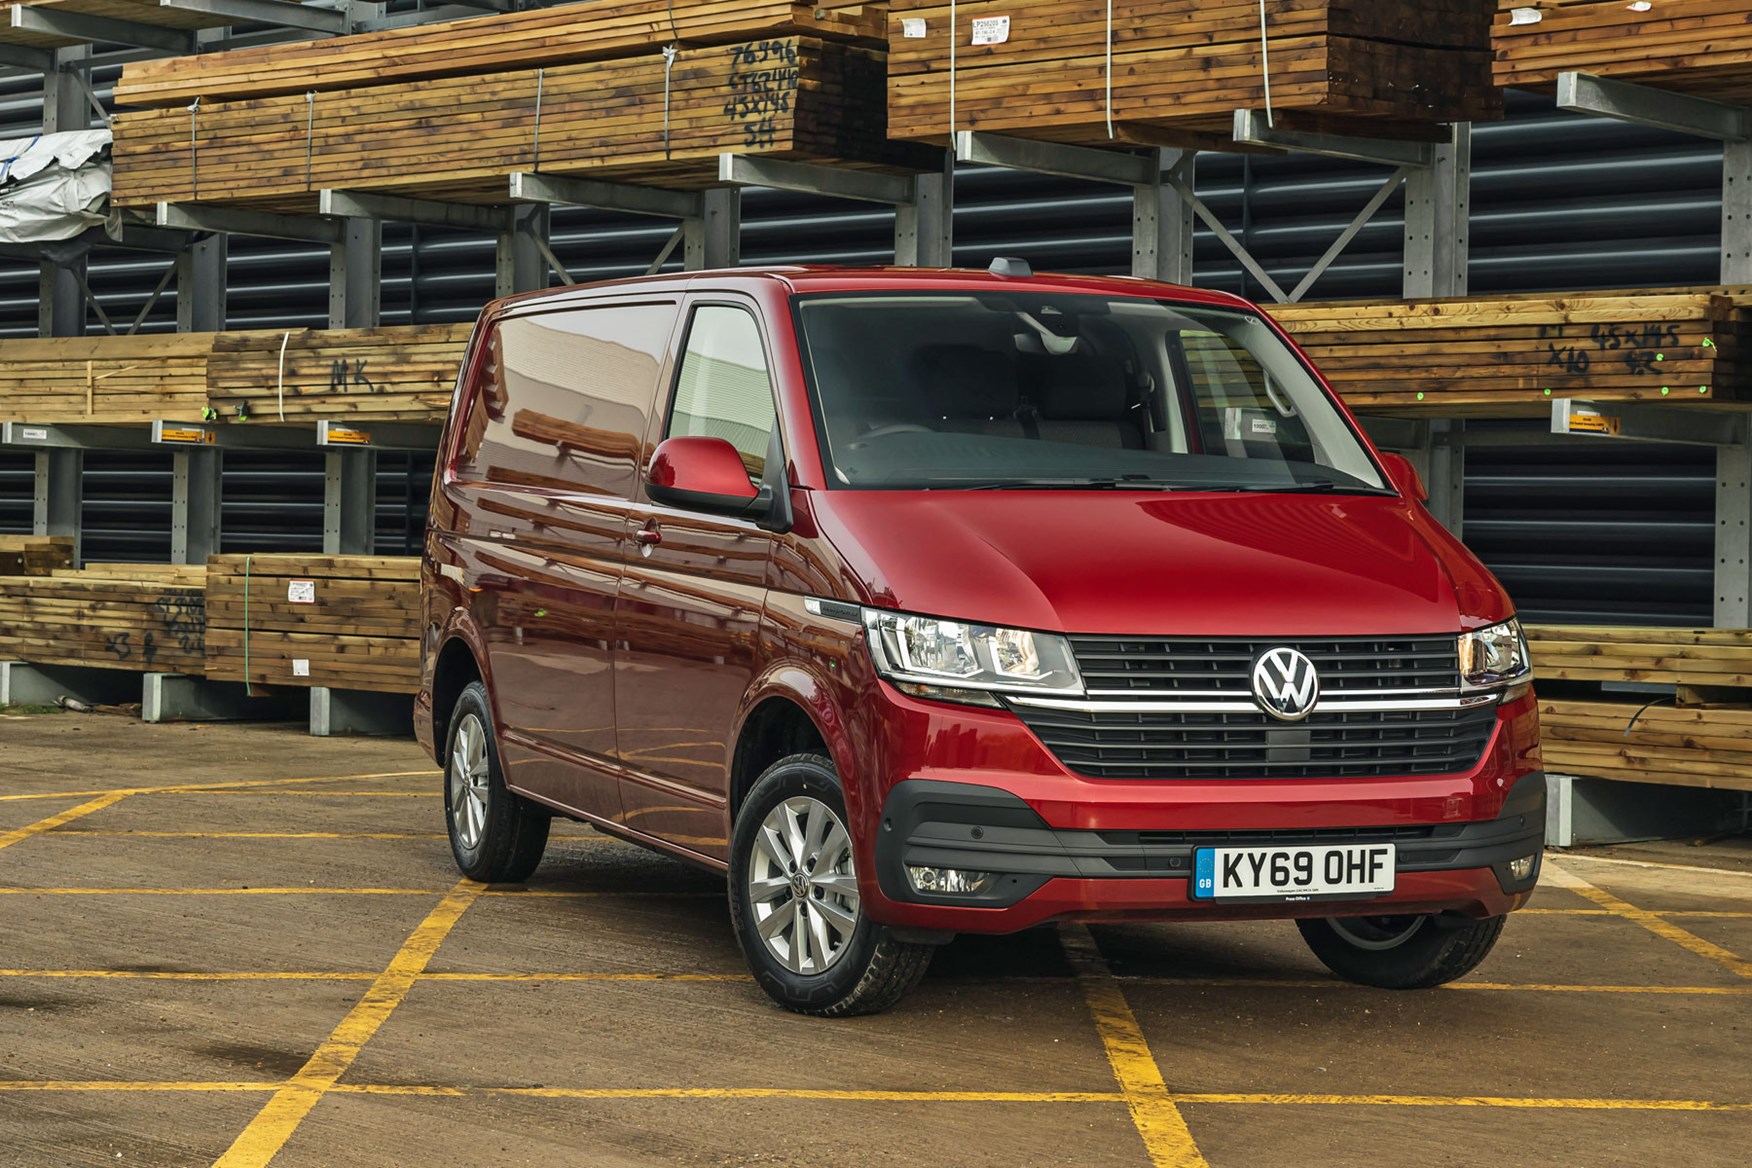 Volkswagen Transporter review, T6.1, 2020, red, front view